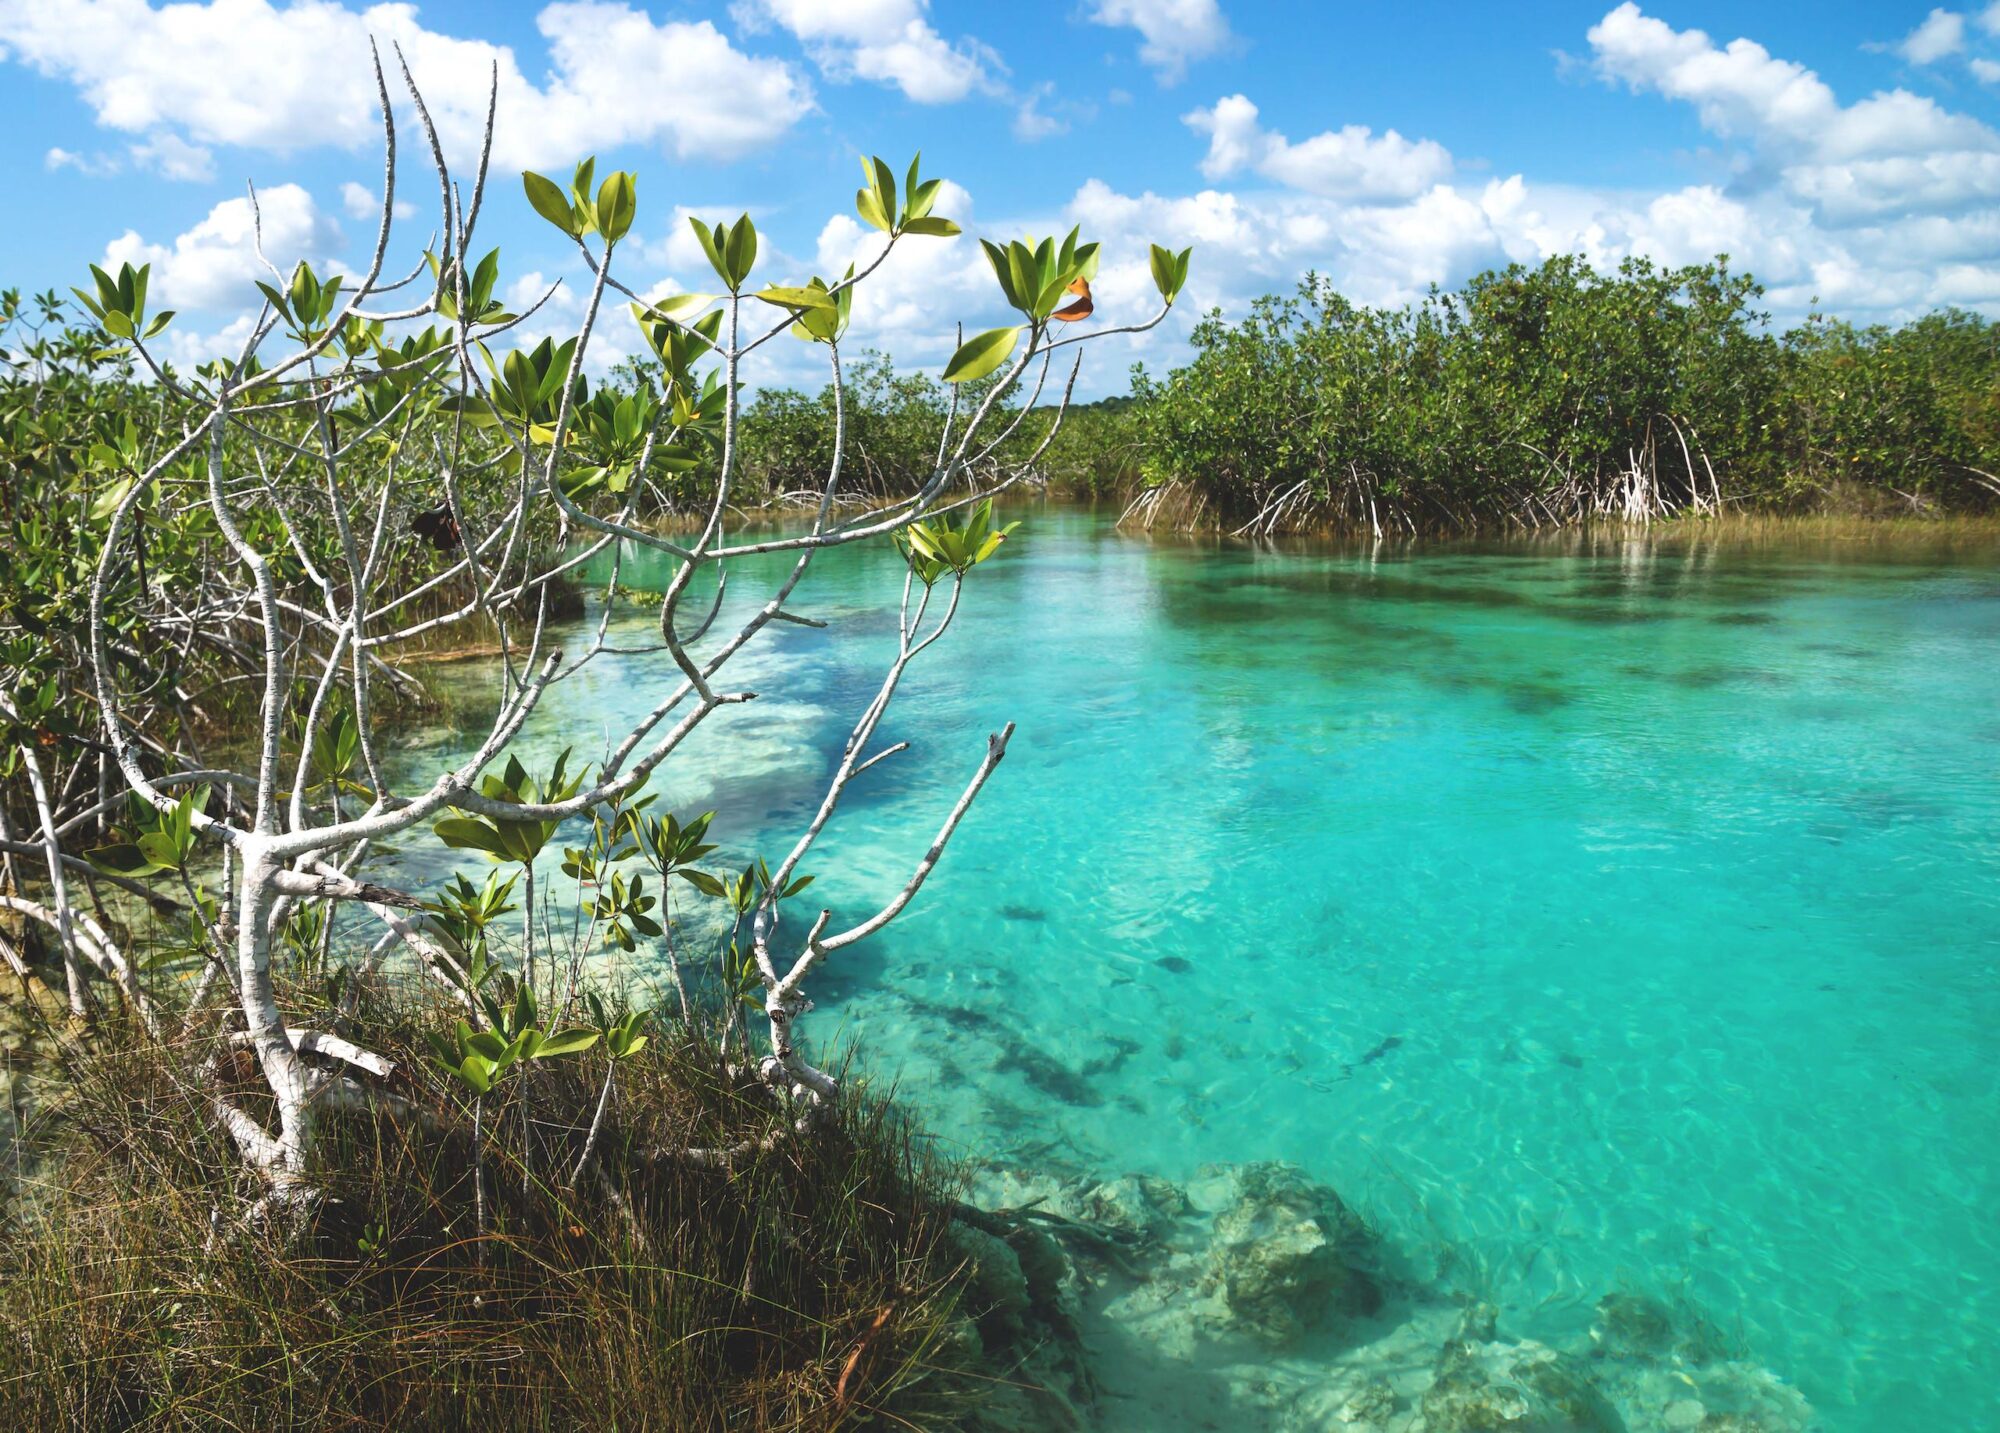 Red mangroves in the Bacalar lagoon in Mexico